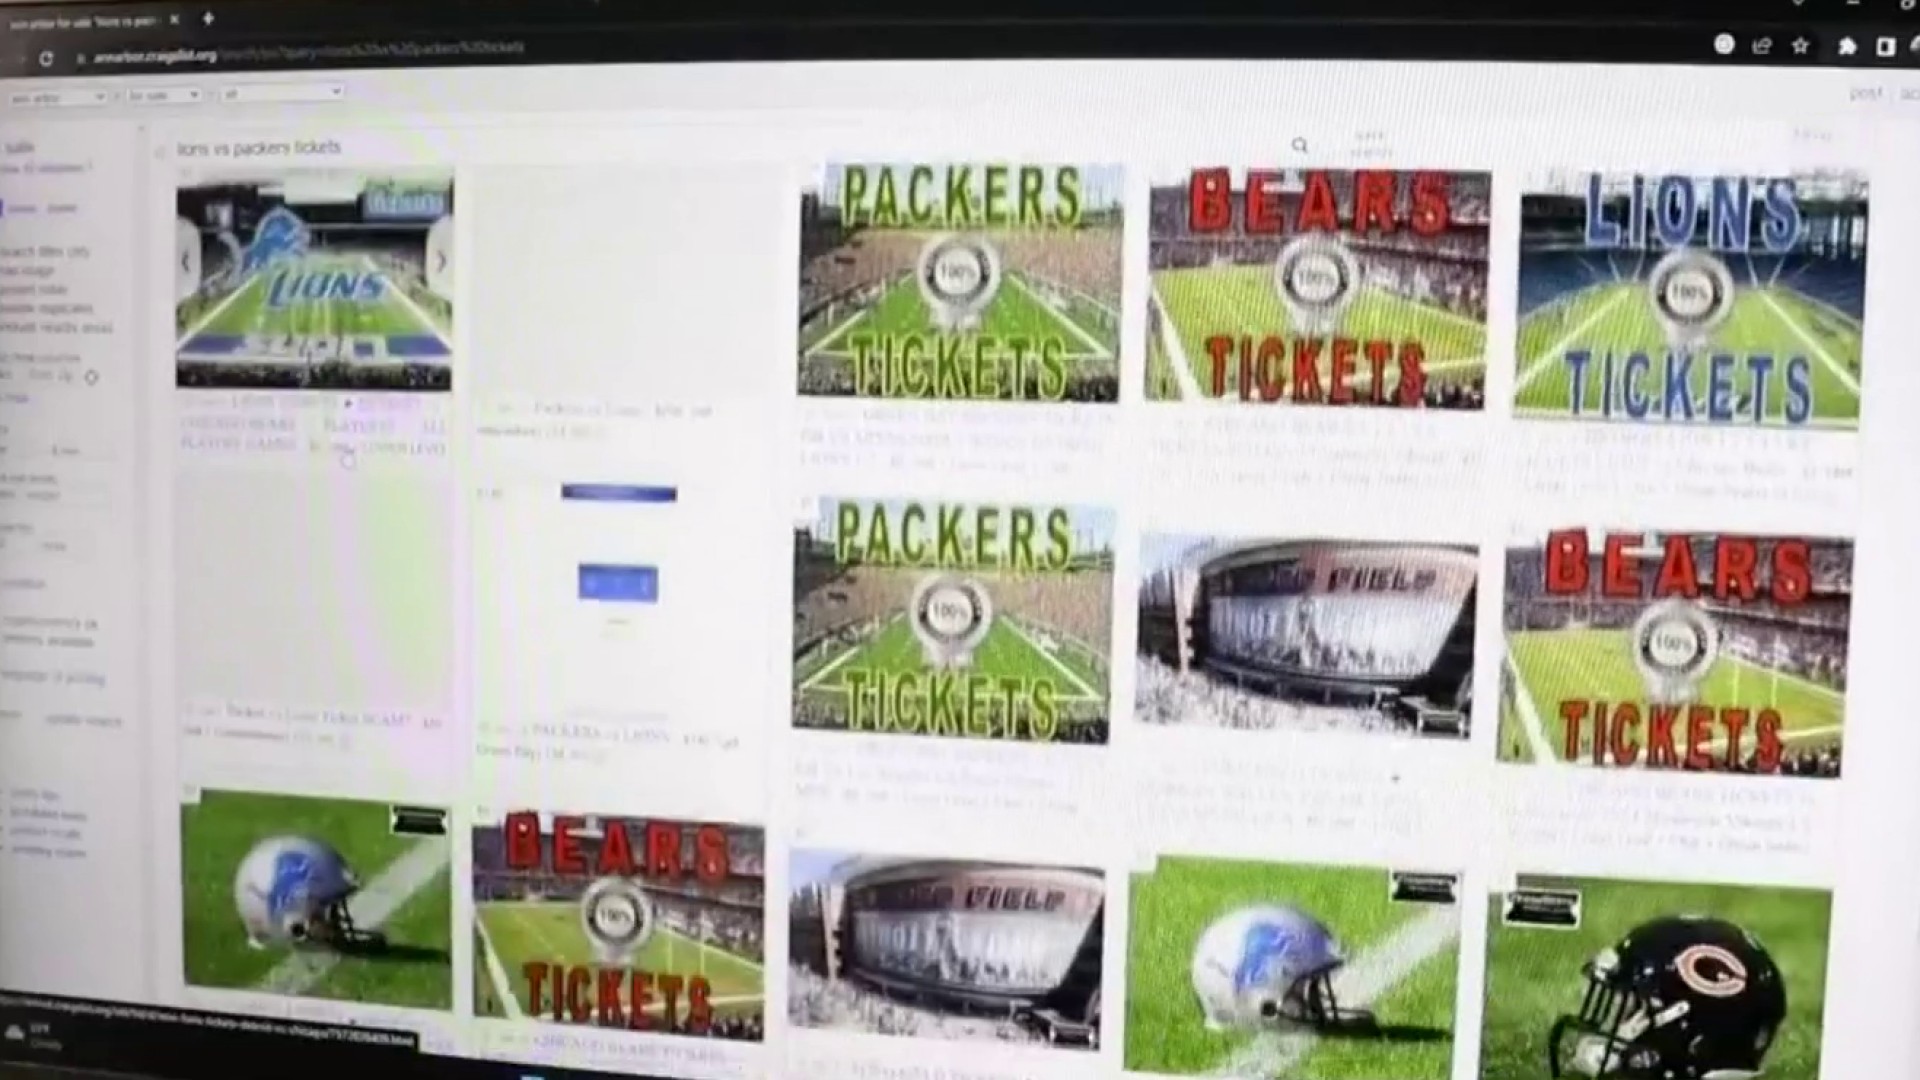 Buying tickets to the big game? Heres some advice to follow so you dont get scammed